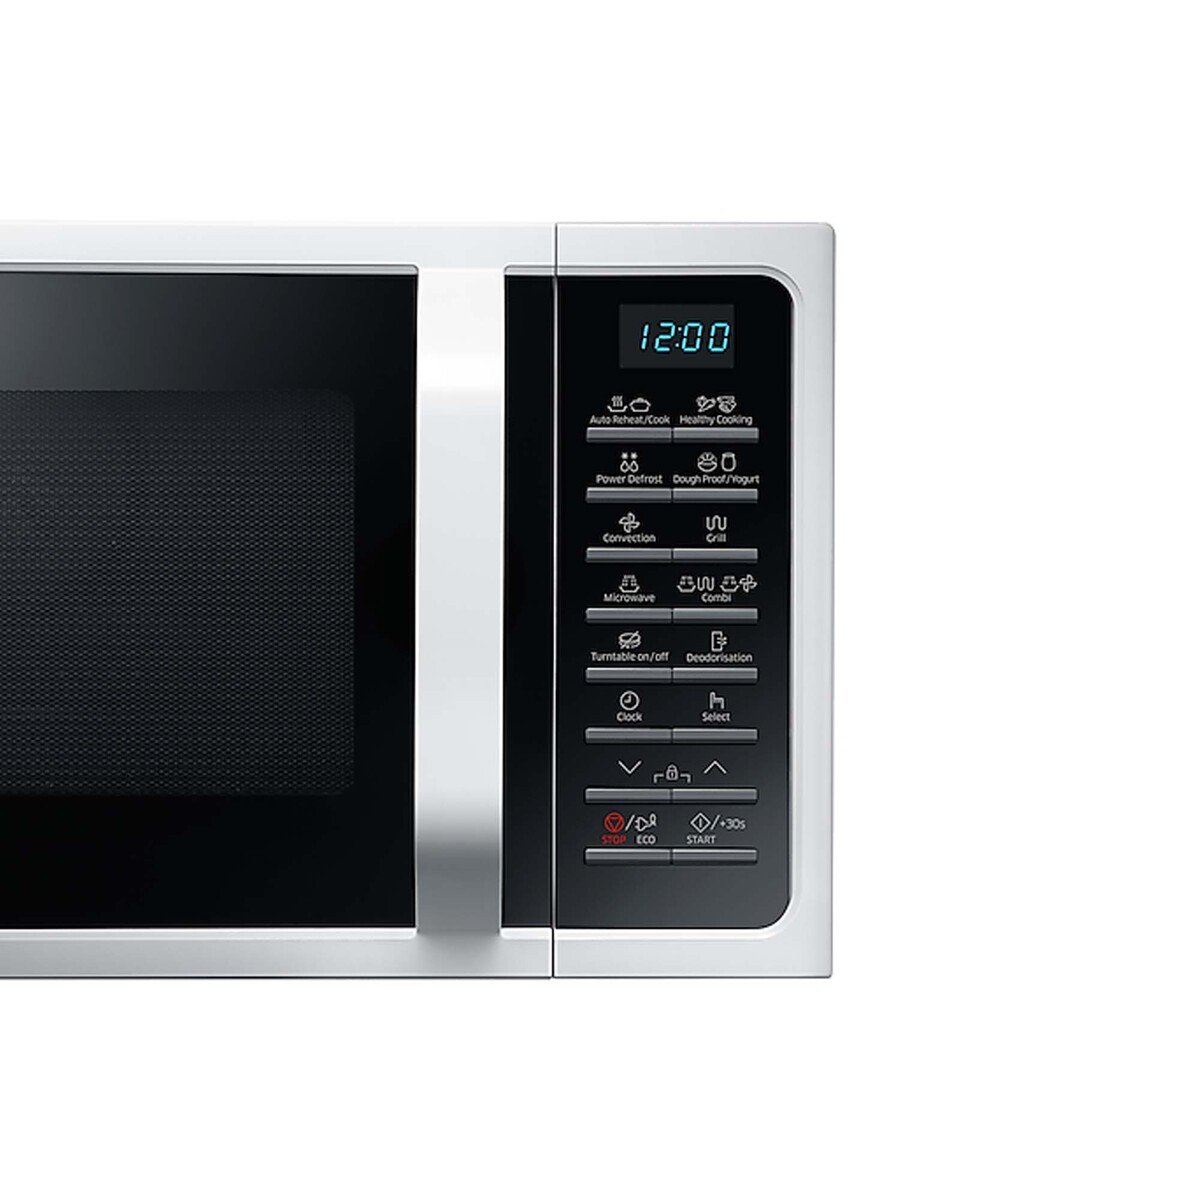 Samsung Microwave Oven with Convection MC28H5015AW 28Ltr